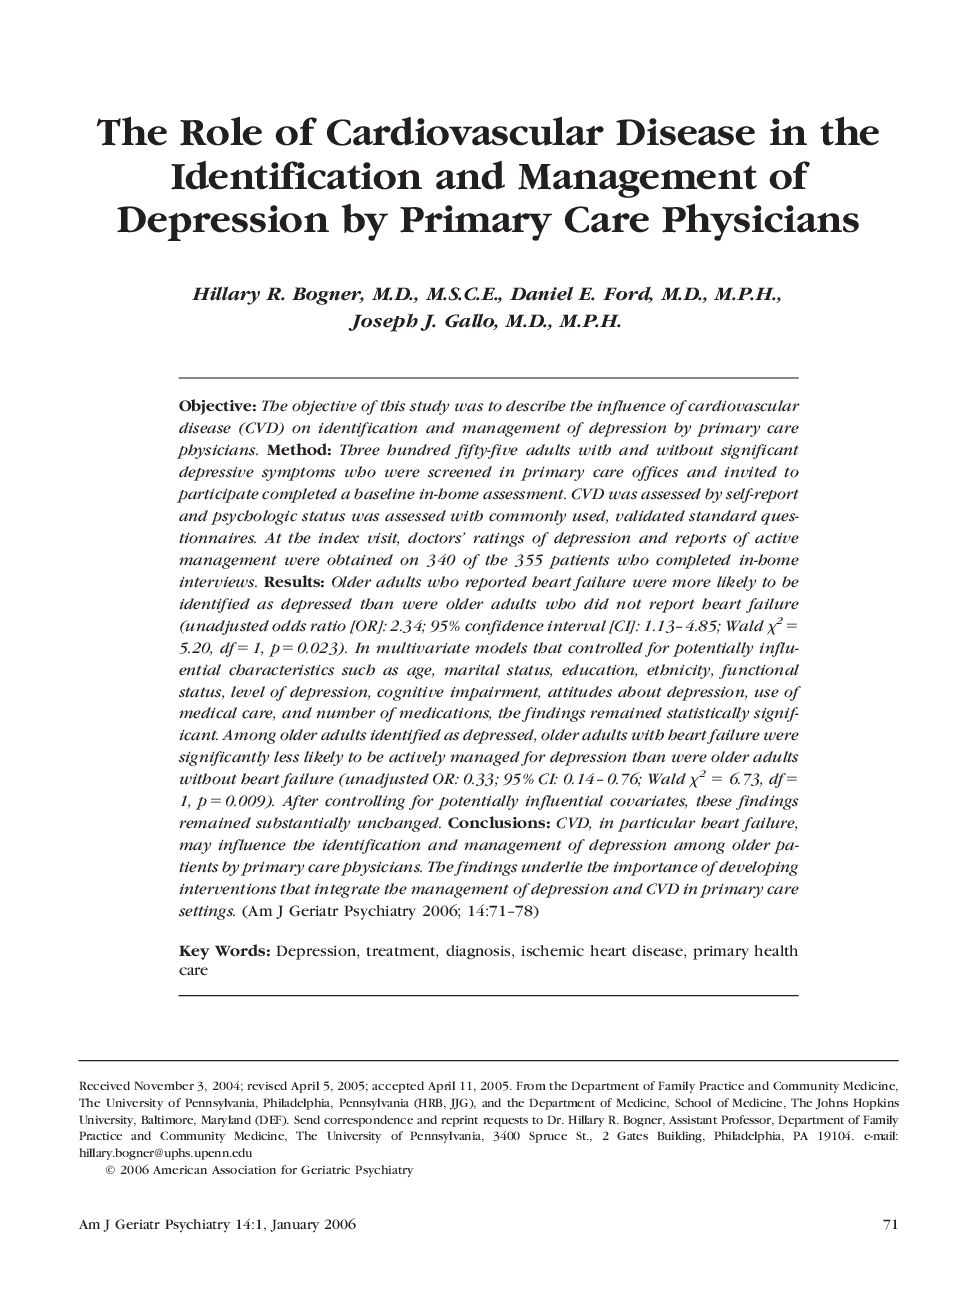 The Role of Cardiovascular Disease in the Identification and Management of Depression by Primary Care Physicians